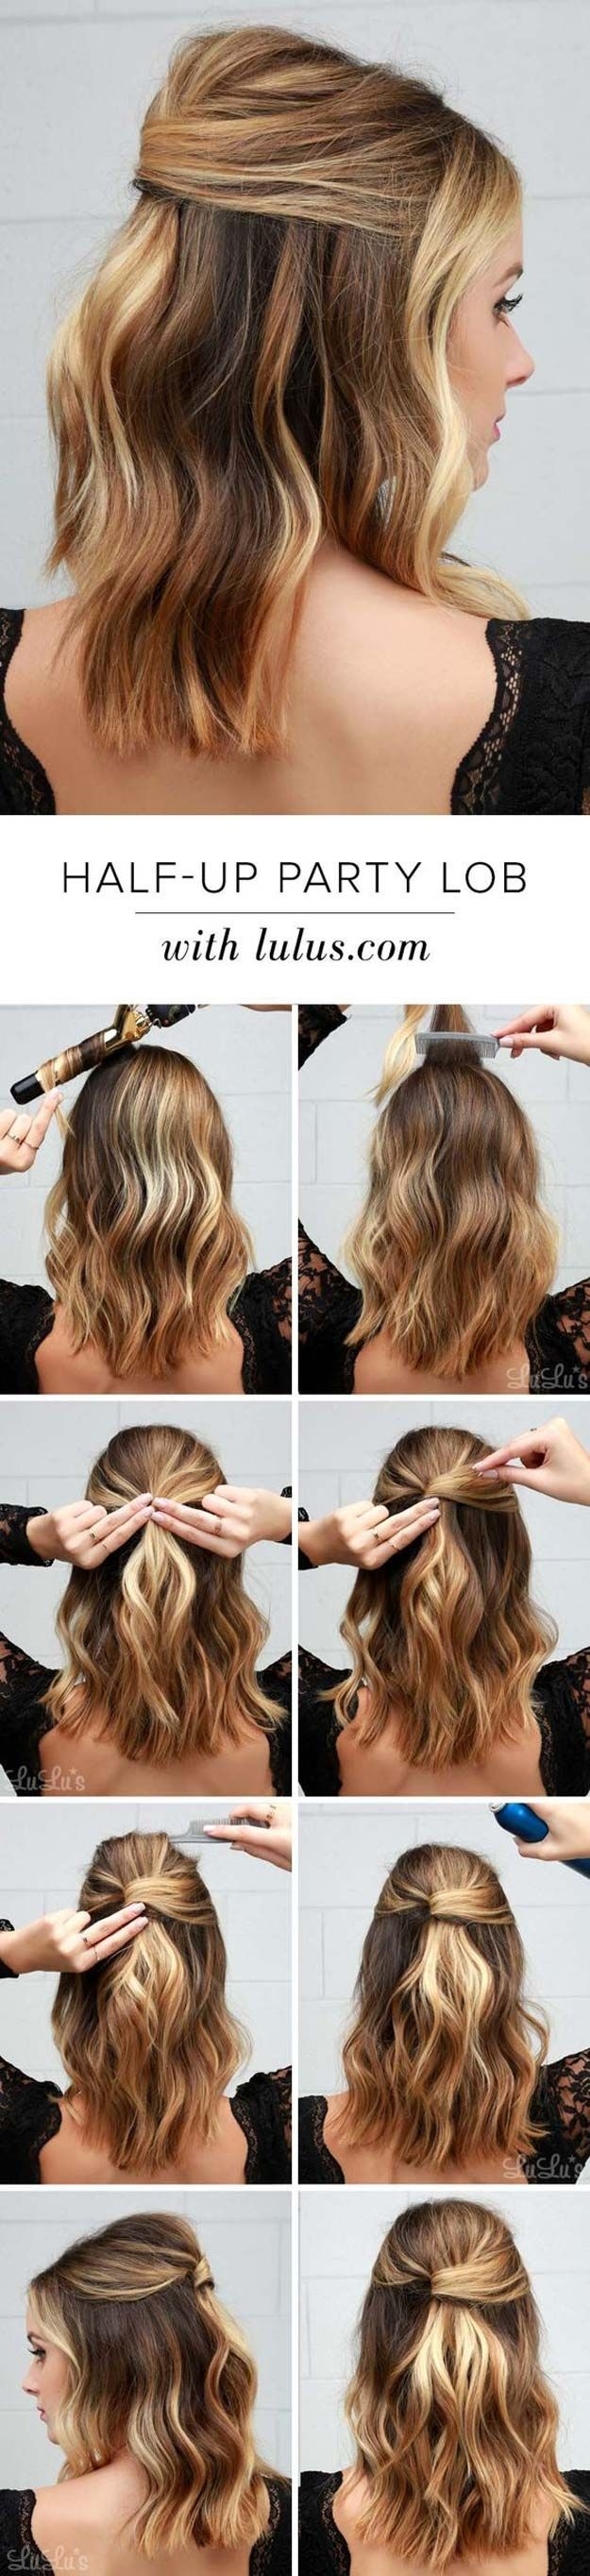 41 Diy Cool Easy Hairstyles That Real People Can Actually Do with Easy To Do Hairstyles At Home